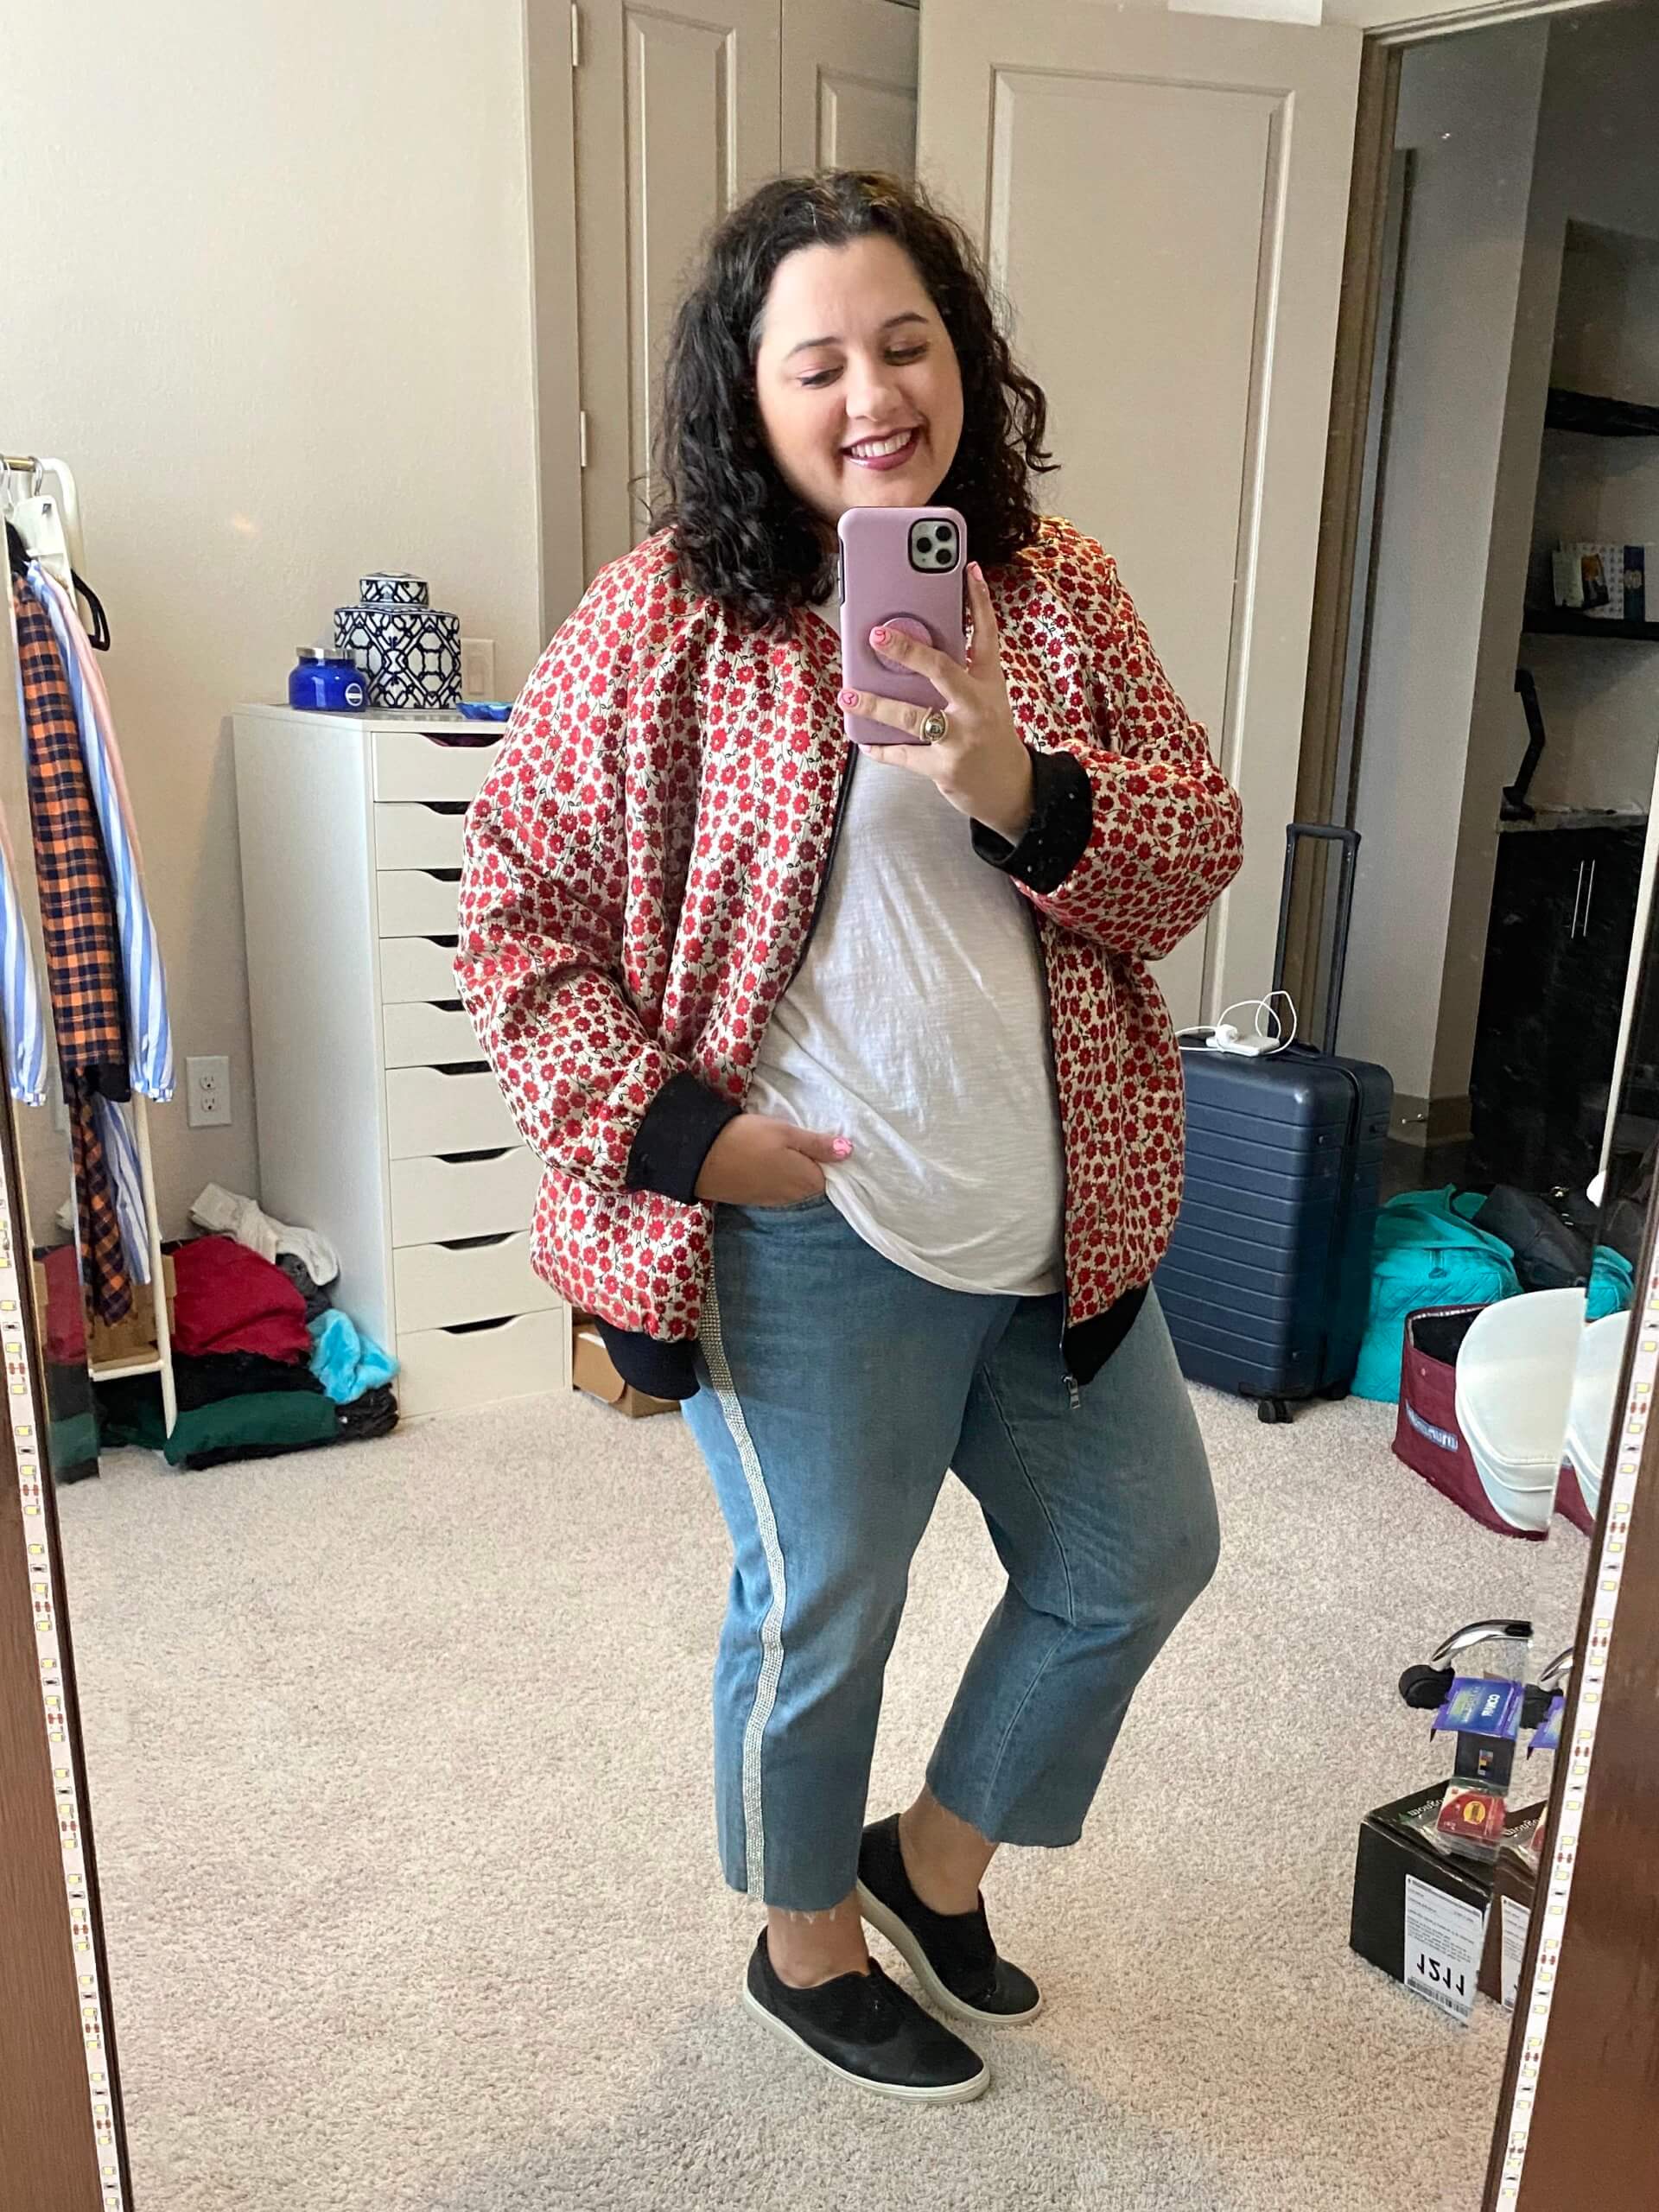 The perfect travel day outfit - plus size girlfriend jeans, a white tee, statement jacket and comfortable sneakers 